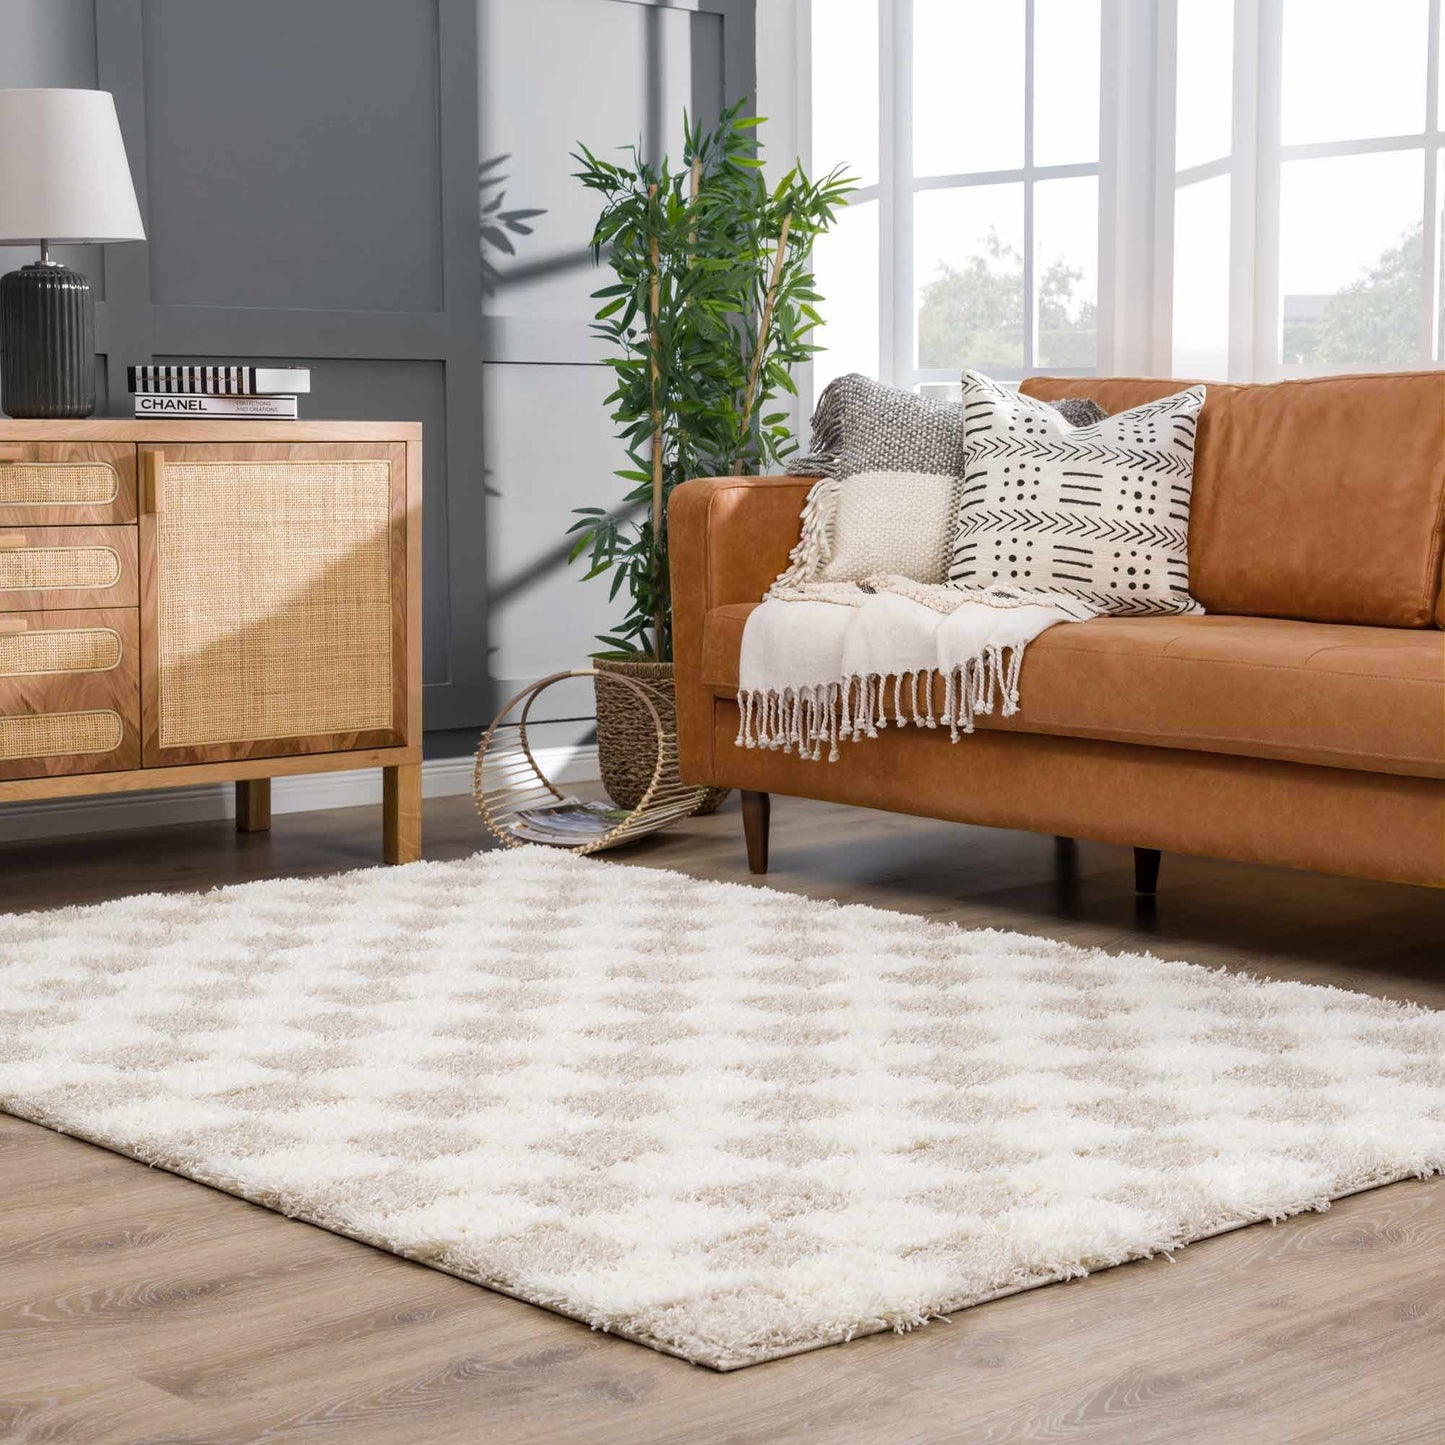 Boutique Rugs Rugs 5'3" x 7'3" Rectangle Atira Light Brown Checkered Area Rug